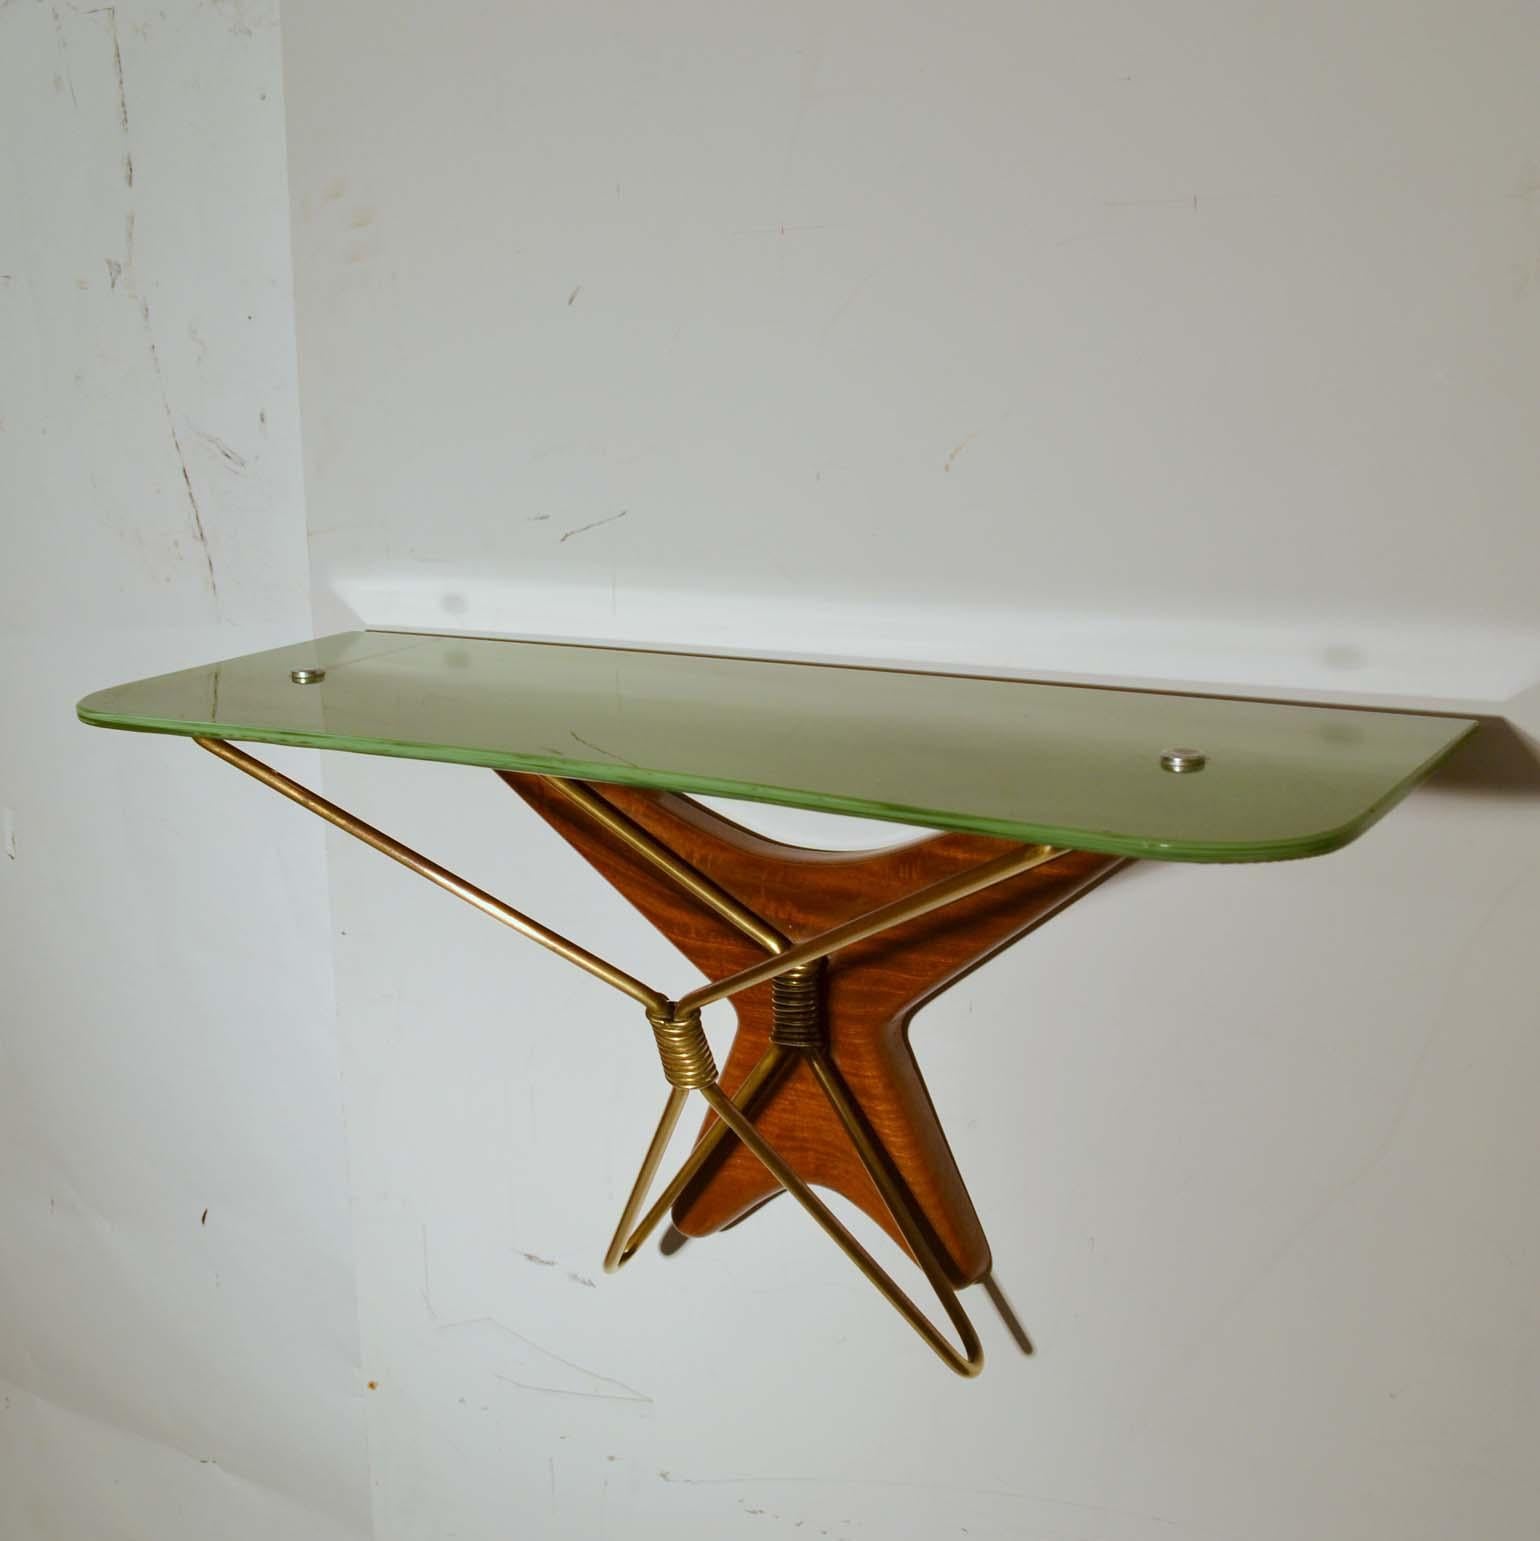 Wall mounted console table is made of sage green hand colored glass resting on top of a brass polished star shaped frame which is attached to a hand carved mahogany back rest that follows the shape of the brass frame. 
Ideal console for a small